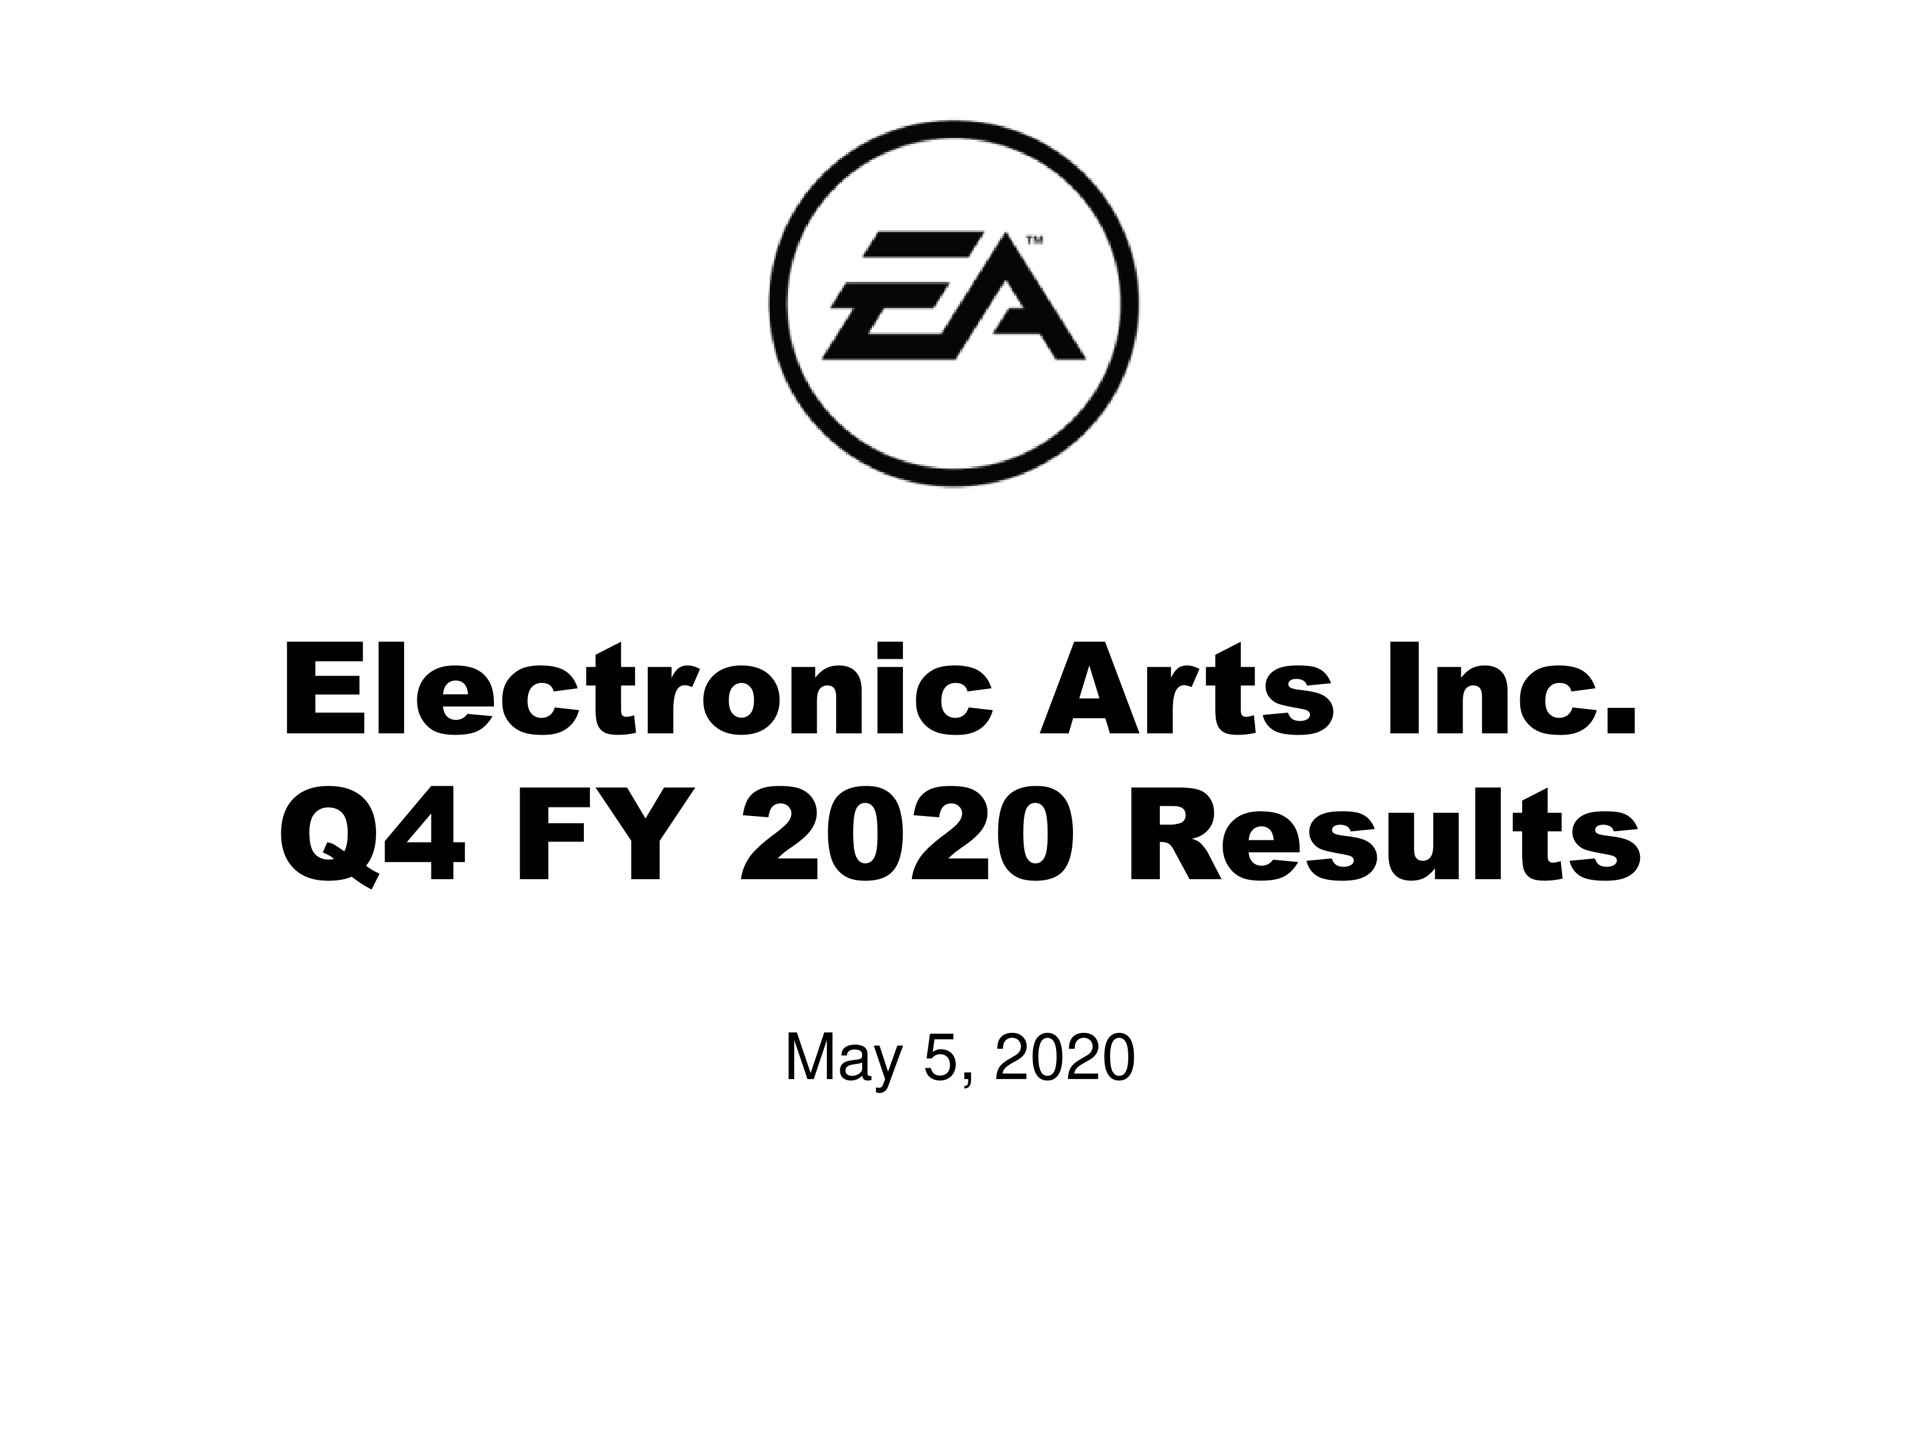 electronic arts results may | Electronic Arts